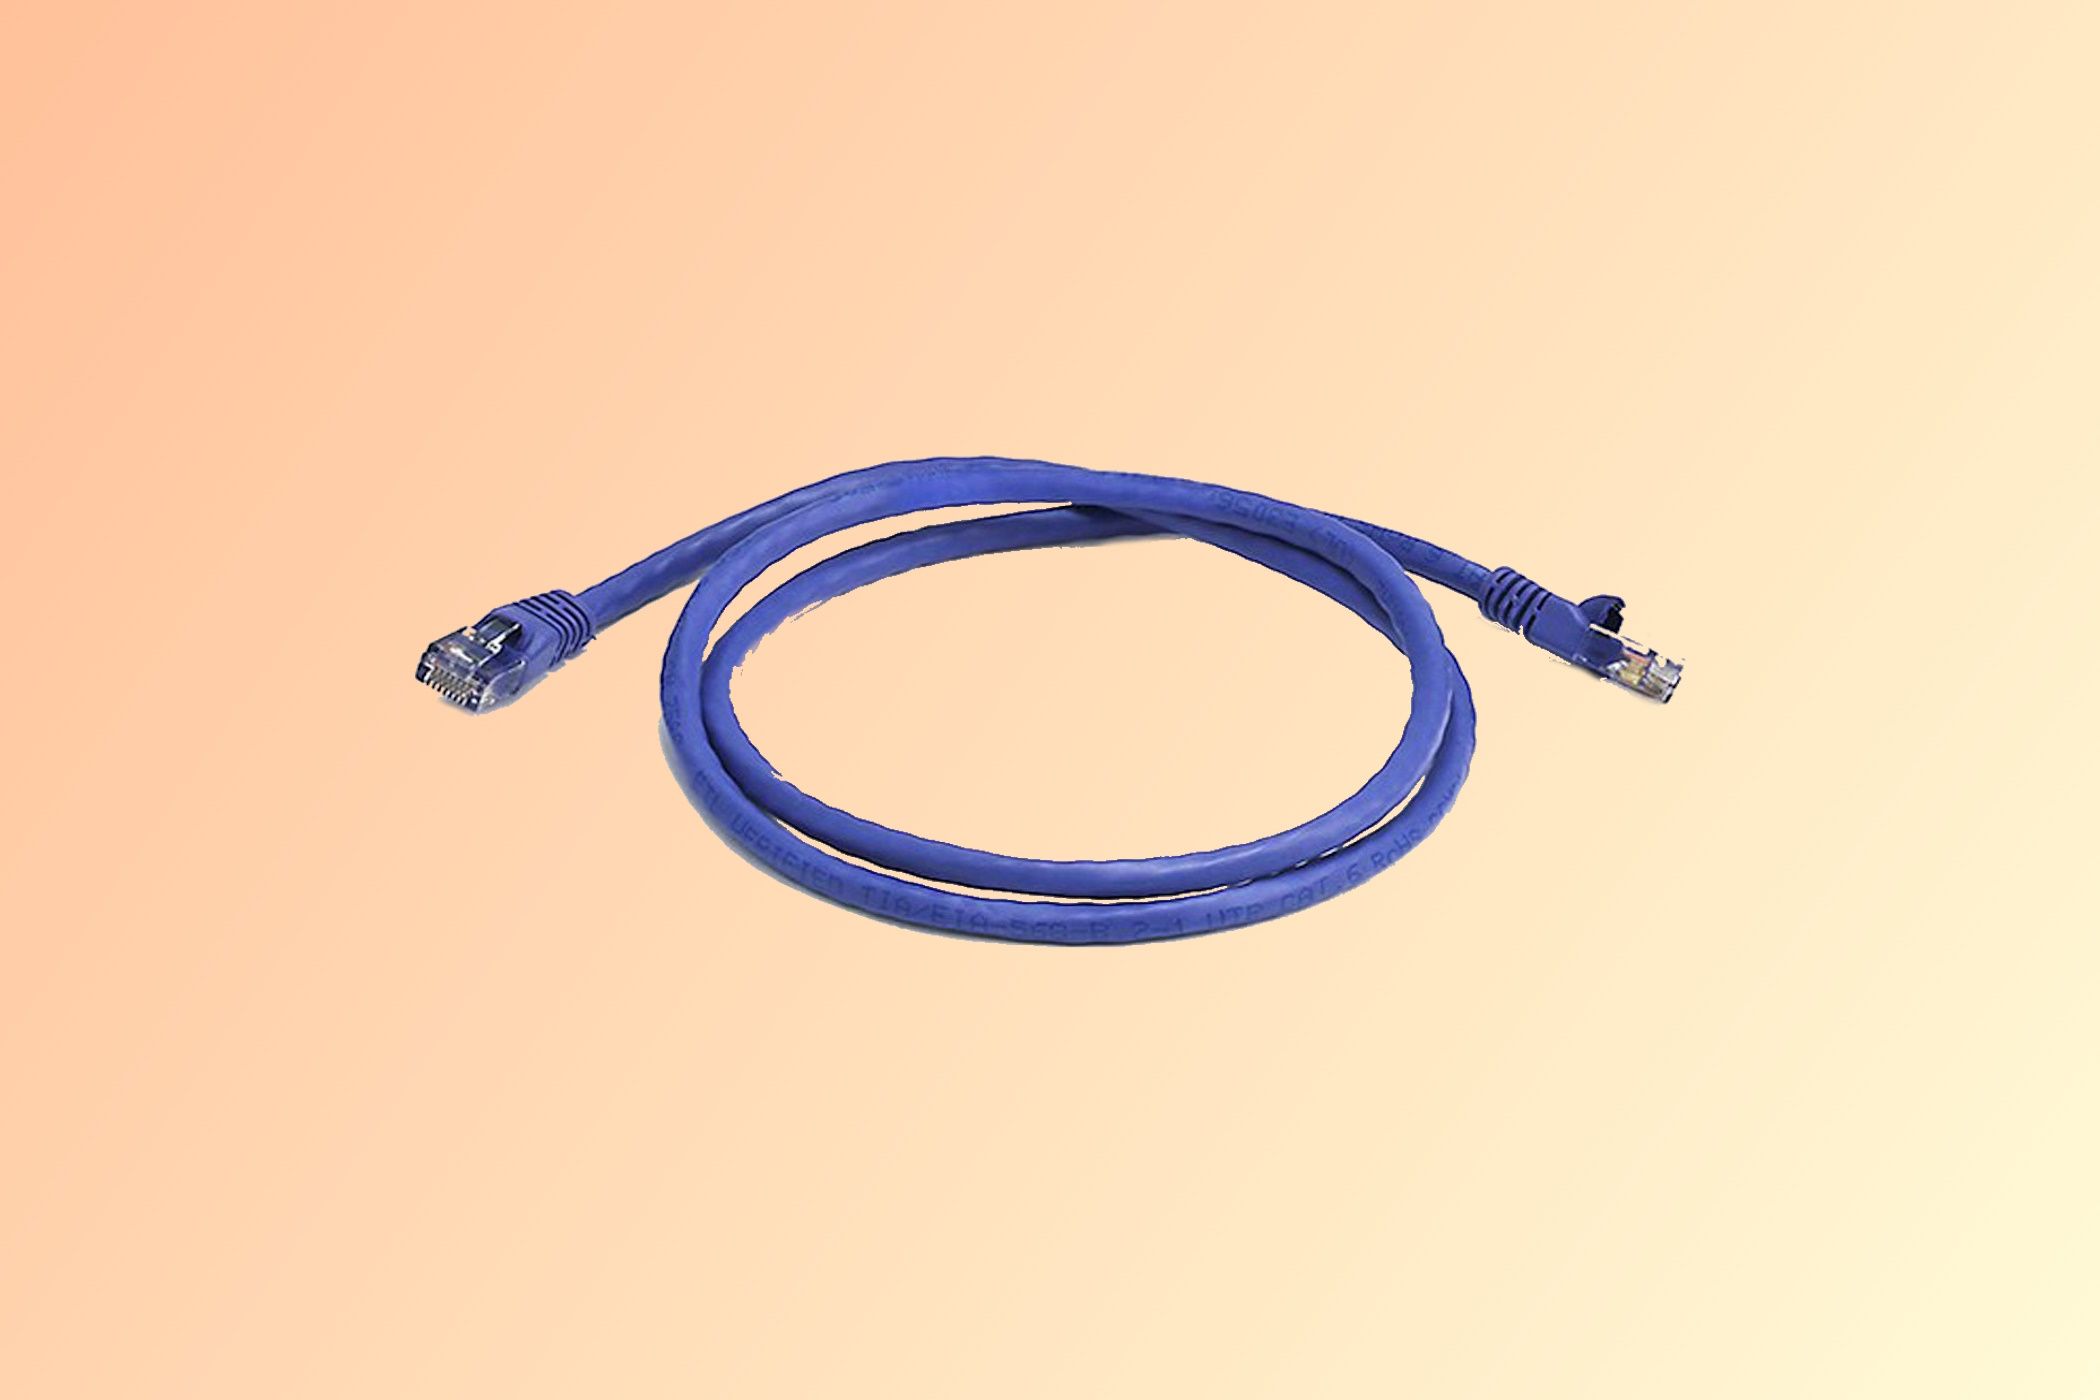 monoprice Cat6 ethernet cable